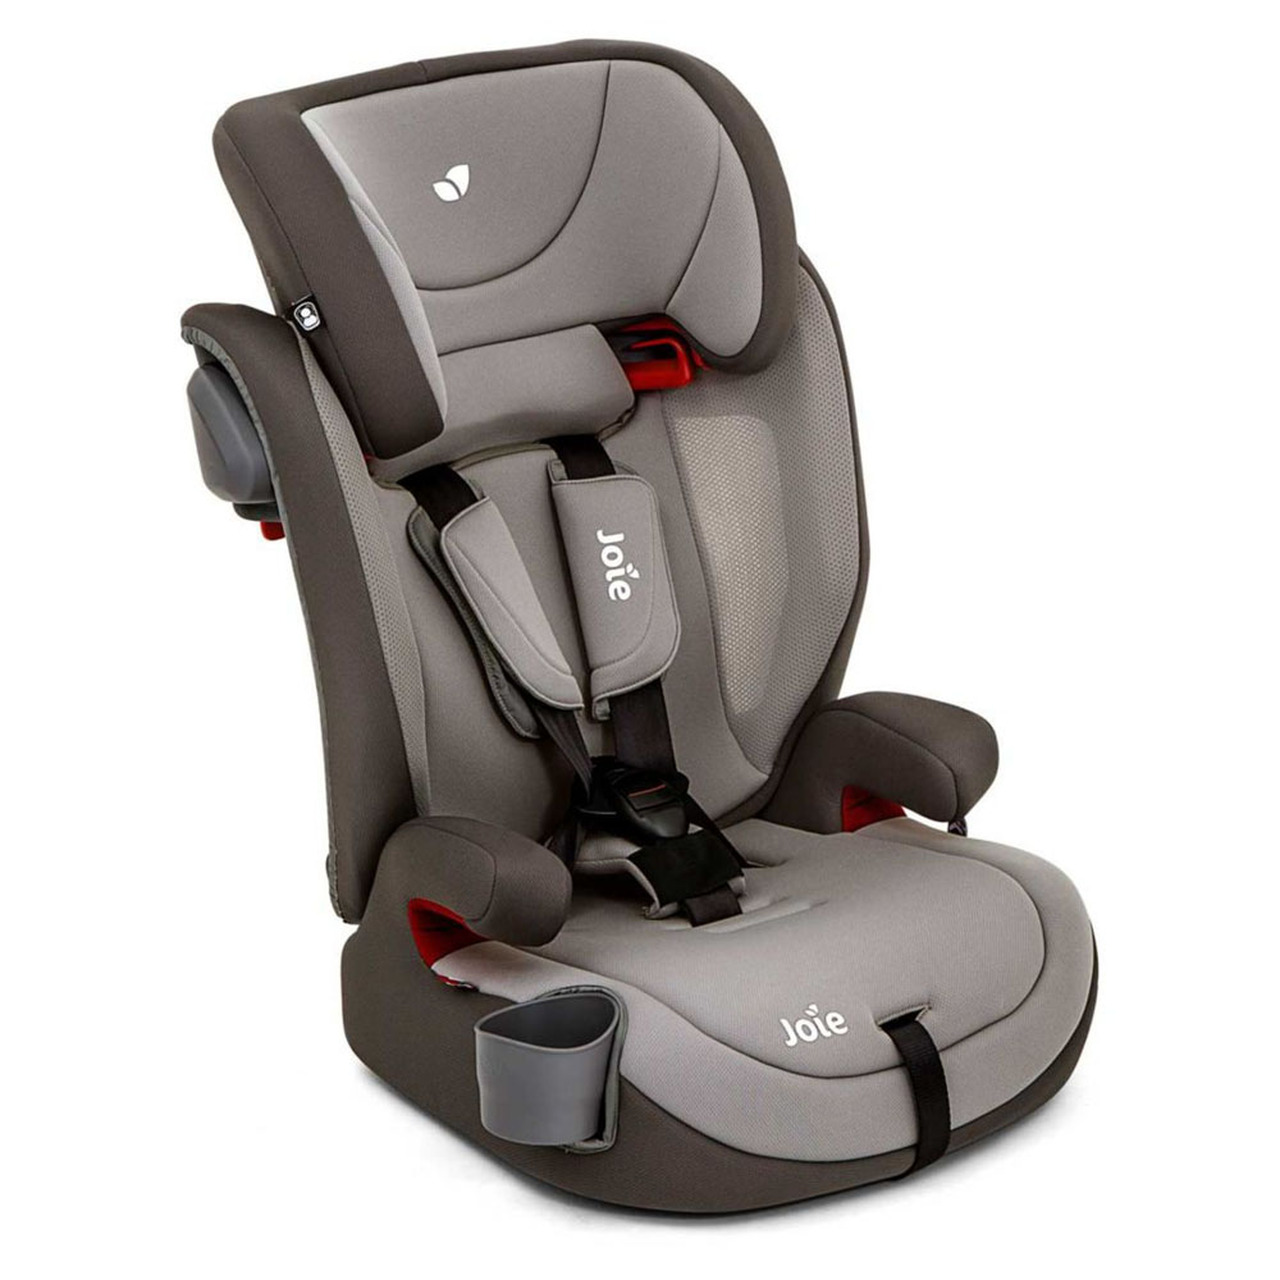 Joie Trillo Shield Group 1/2/3 Car Seat - Dark Pewter (9 Months-12 Years)